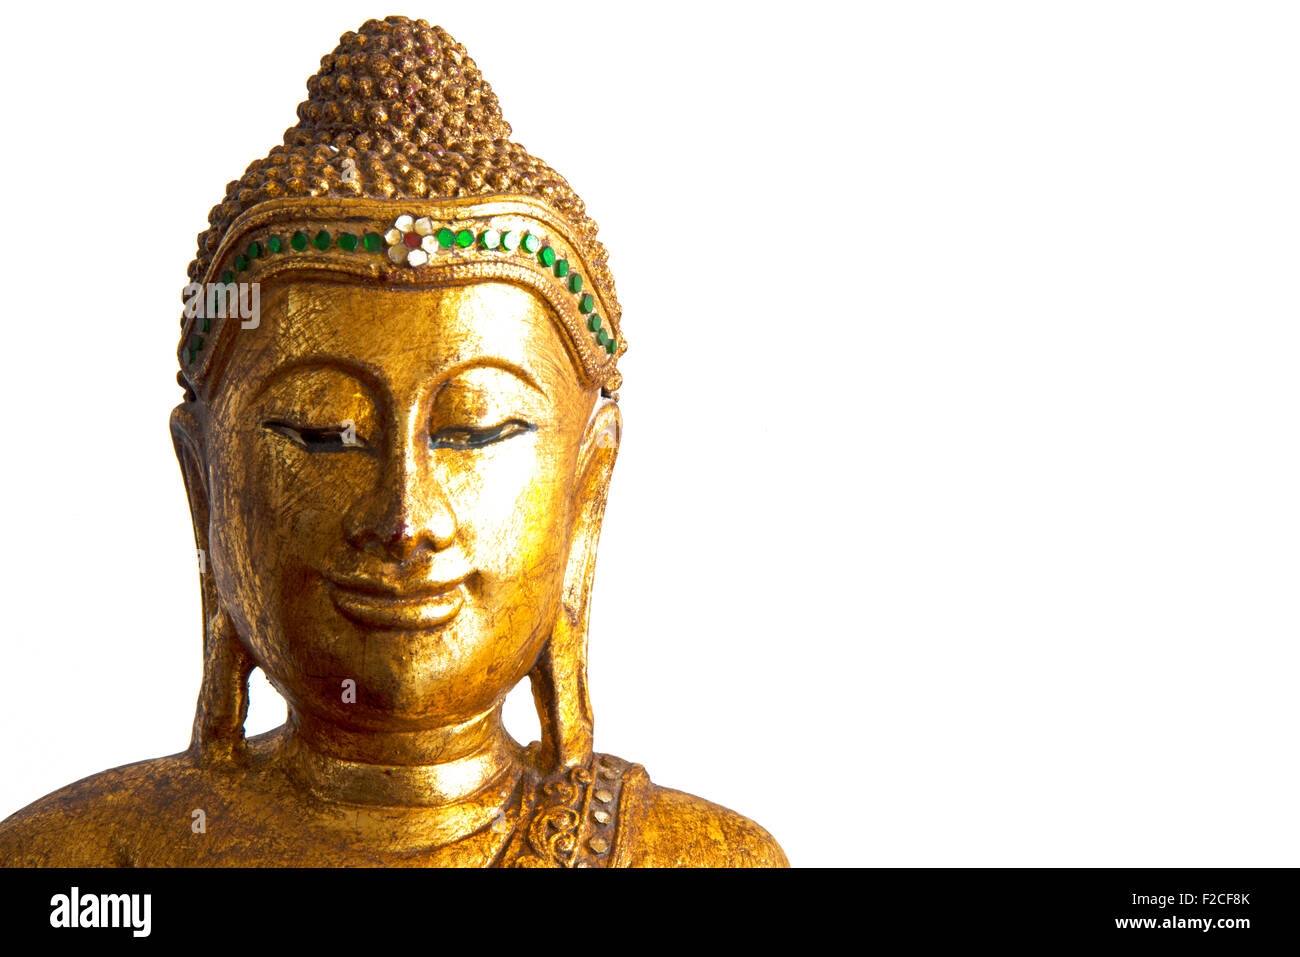 Decorative sculpture of Buddha head in gold color Stock Photo